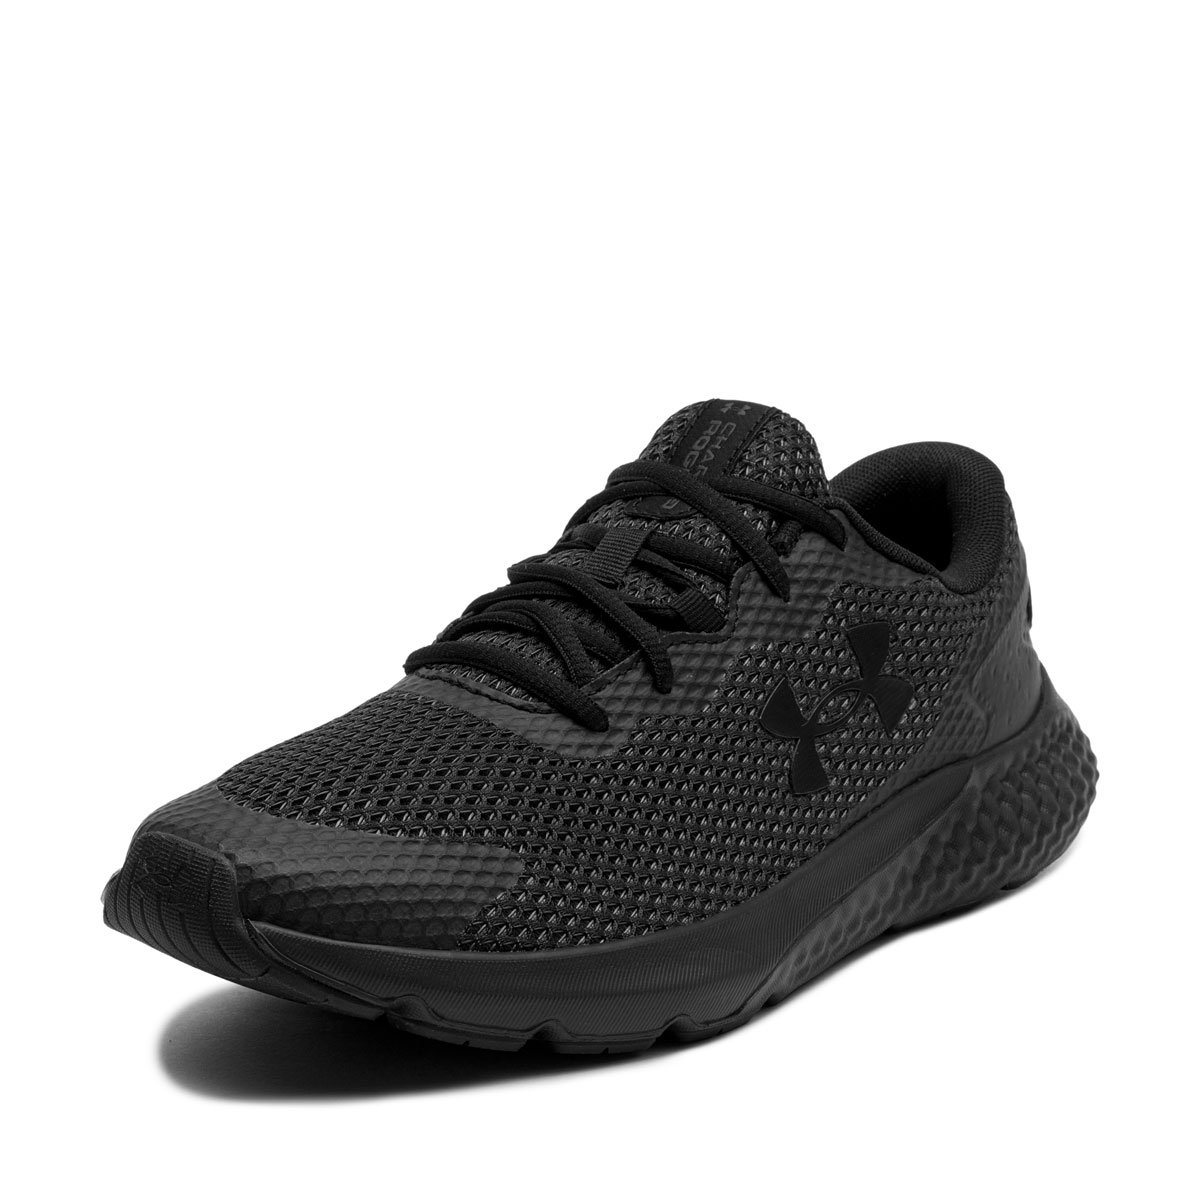 https://www.shopsector.com/uploads/productgalleryfile/images/1200x1200/maratonki-under-armour-charged-rogue-3-3024877-003-3-2.jpg